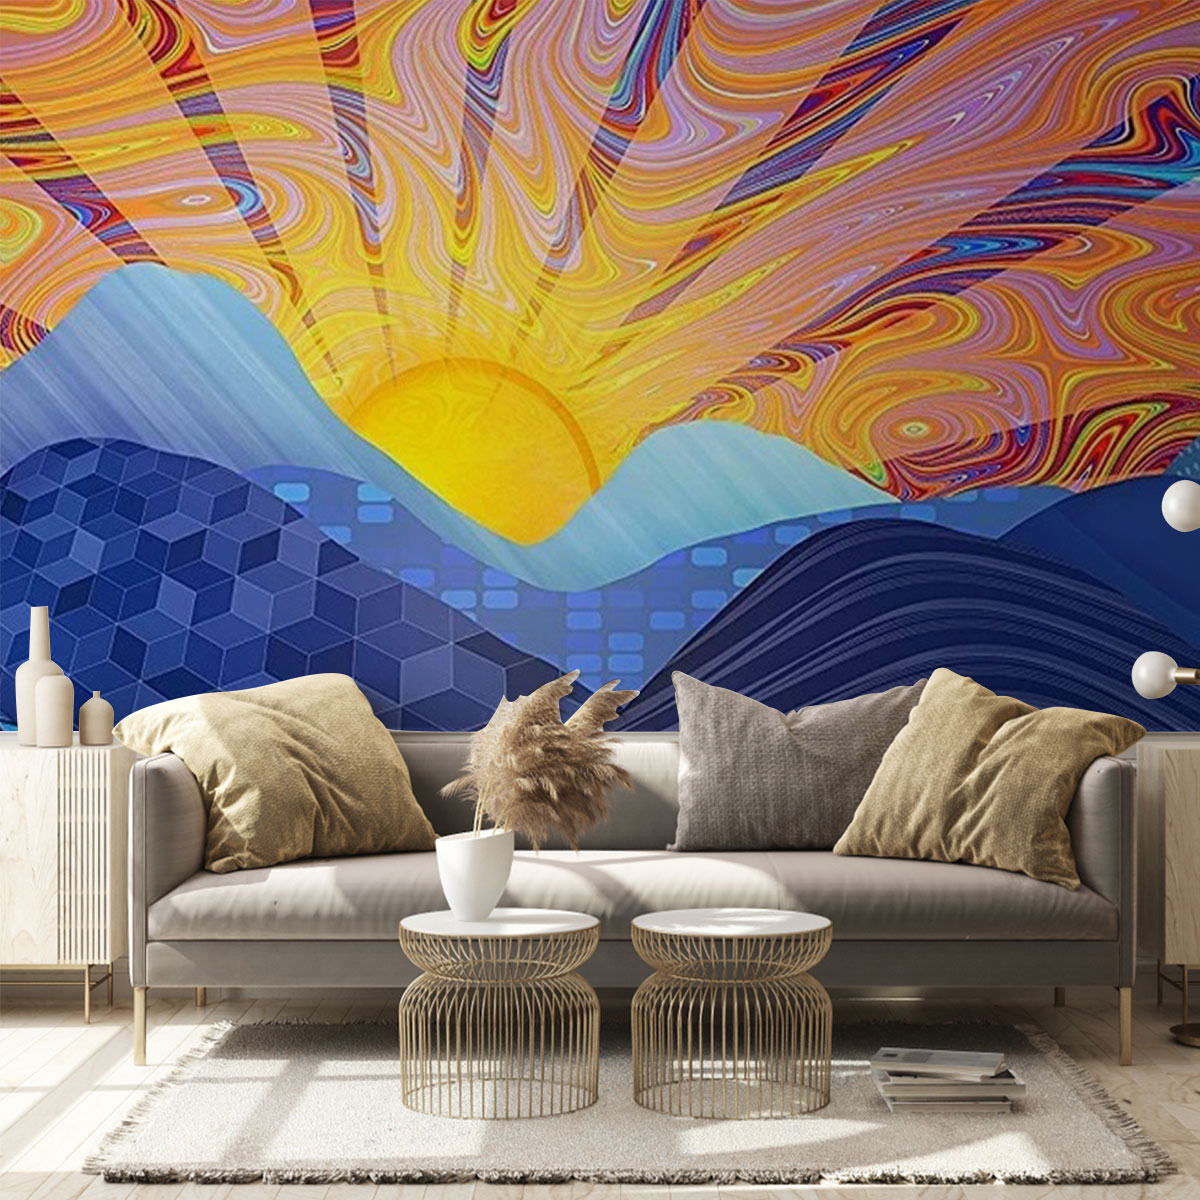 Psychedelic Sunrise Wall Mural